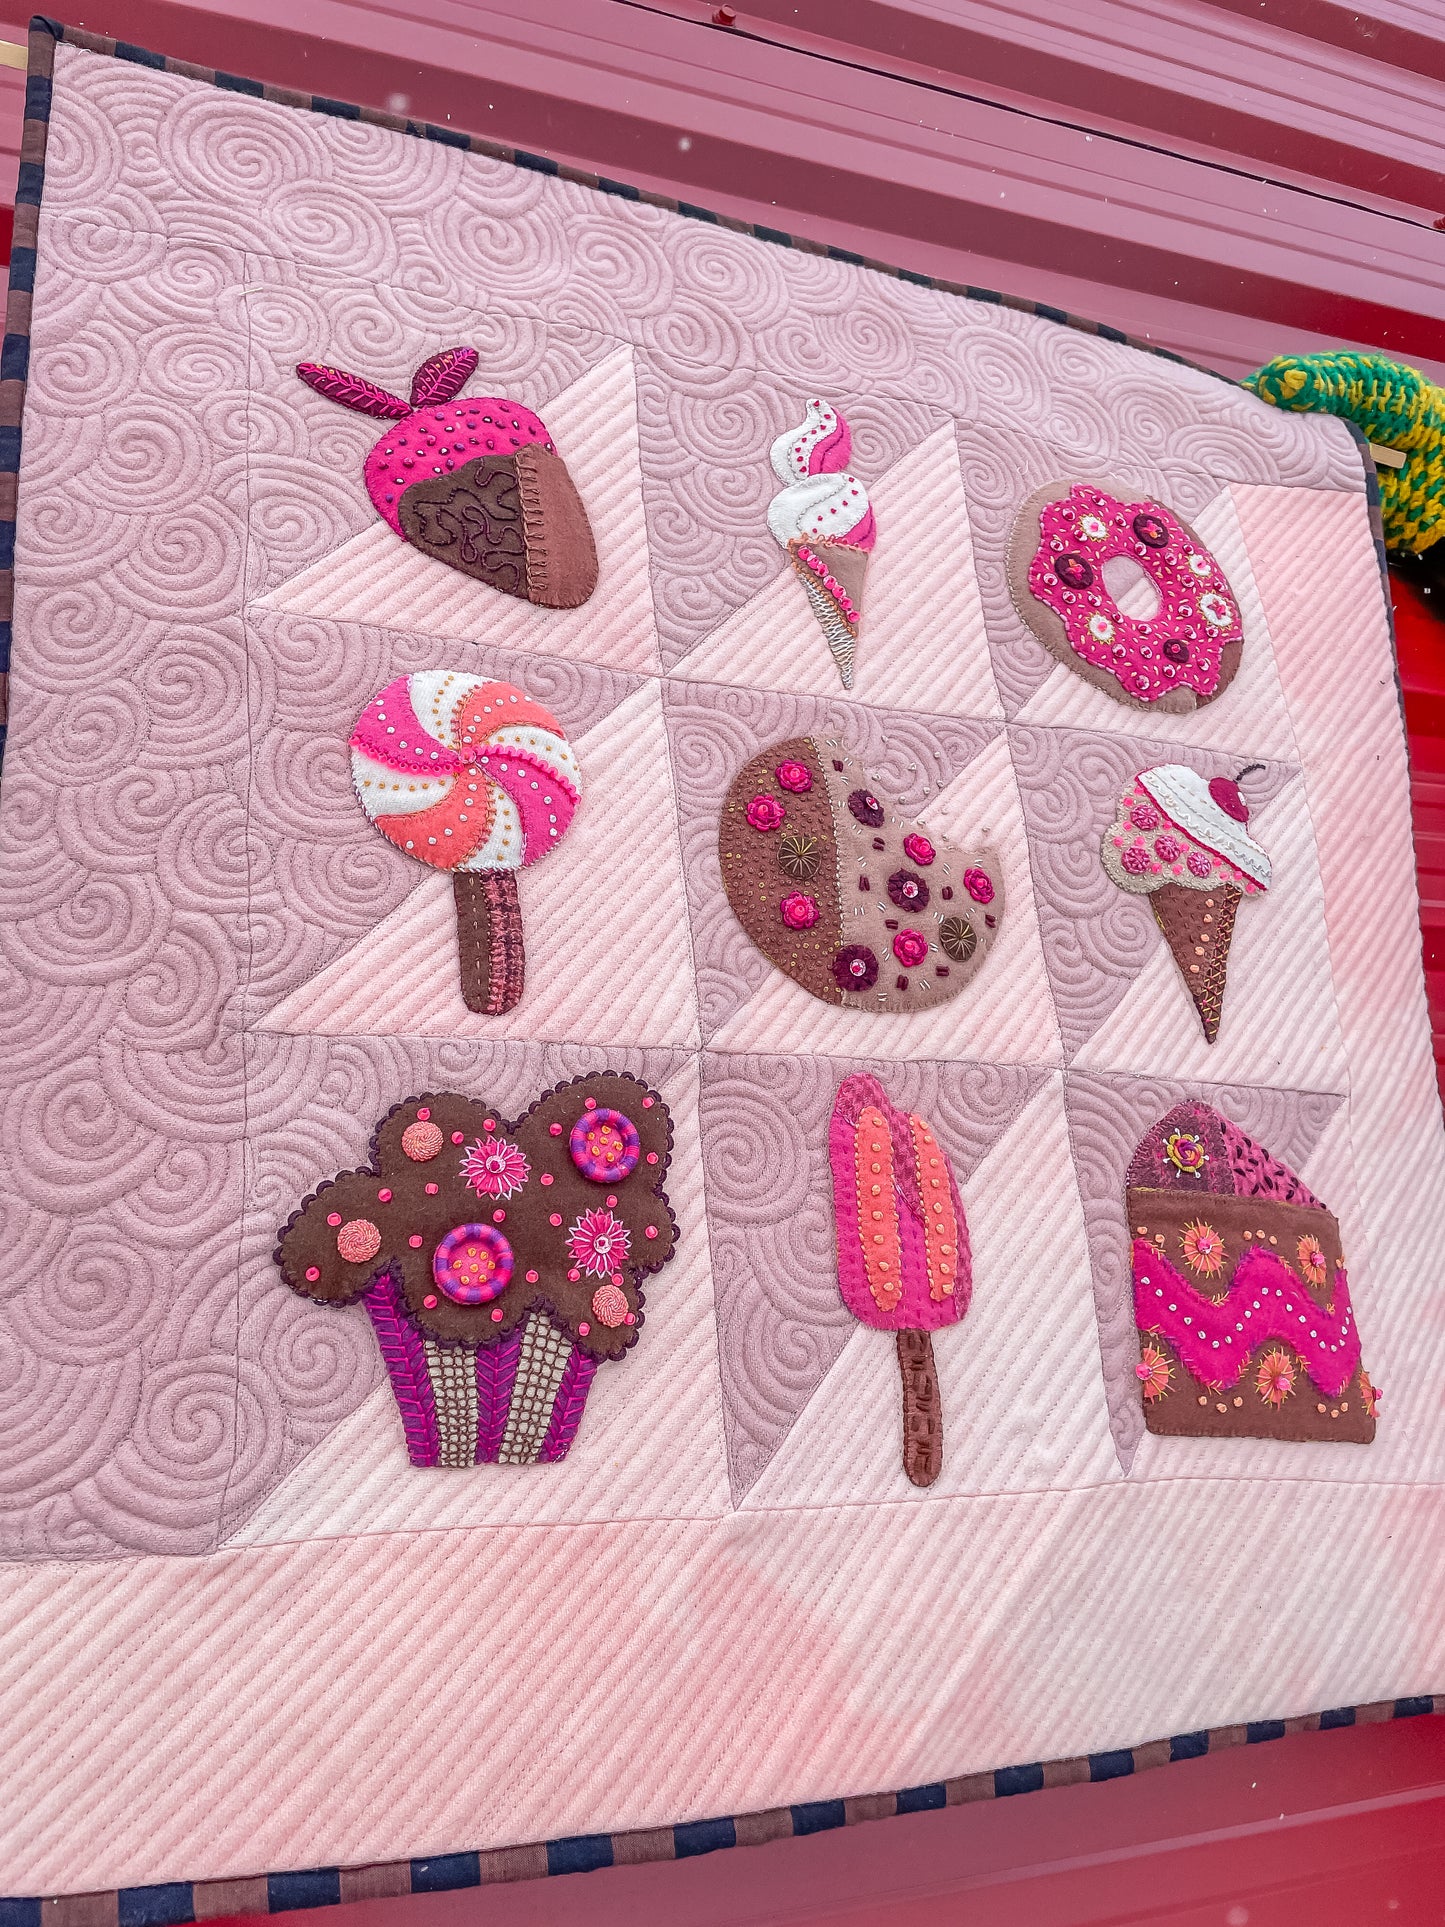 Sprinkles and Stitches Quilt Kit